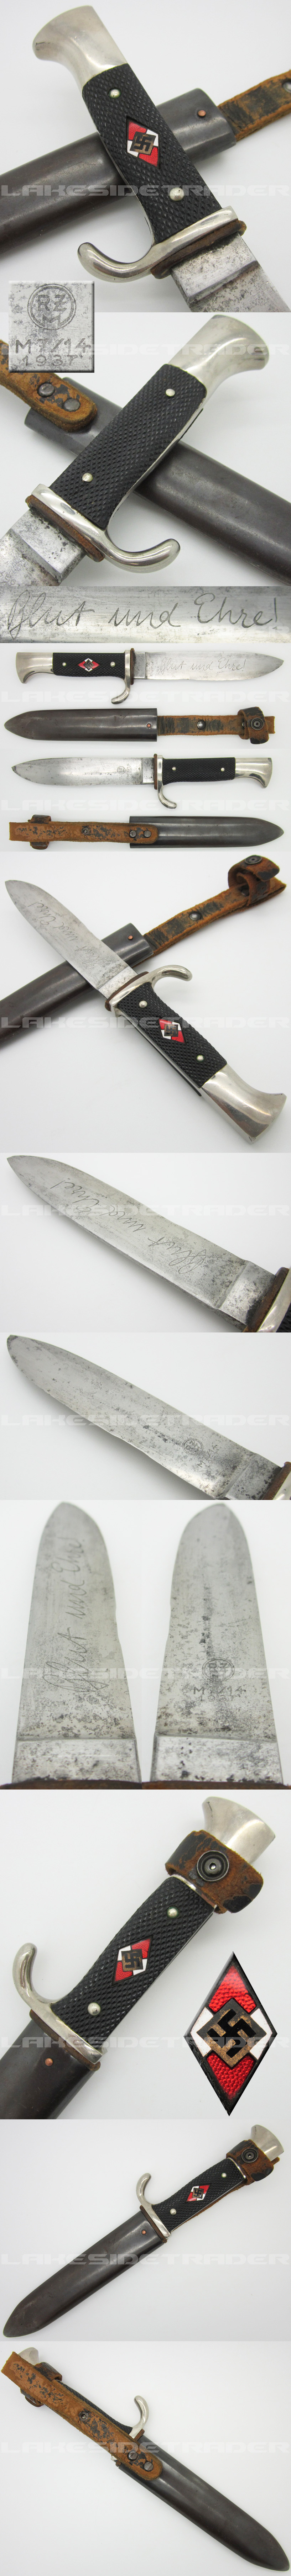 Transitional Hitler Youth Dagger by RZM M7/14 1937